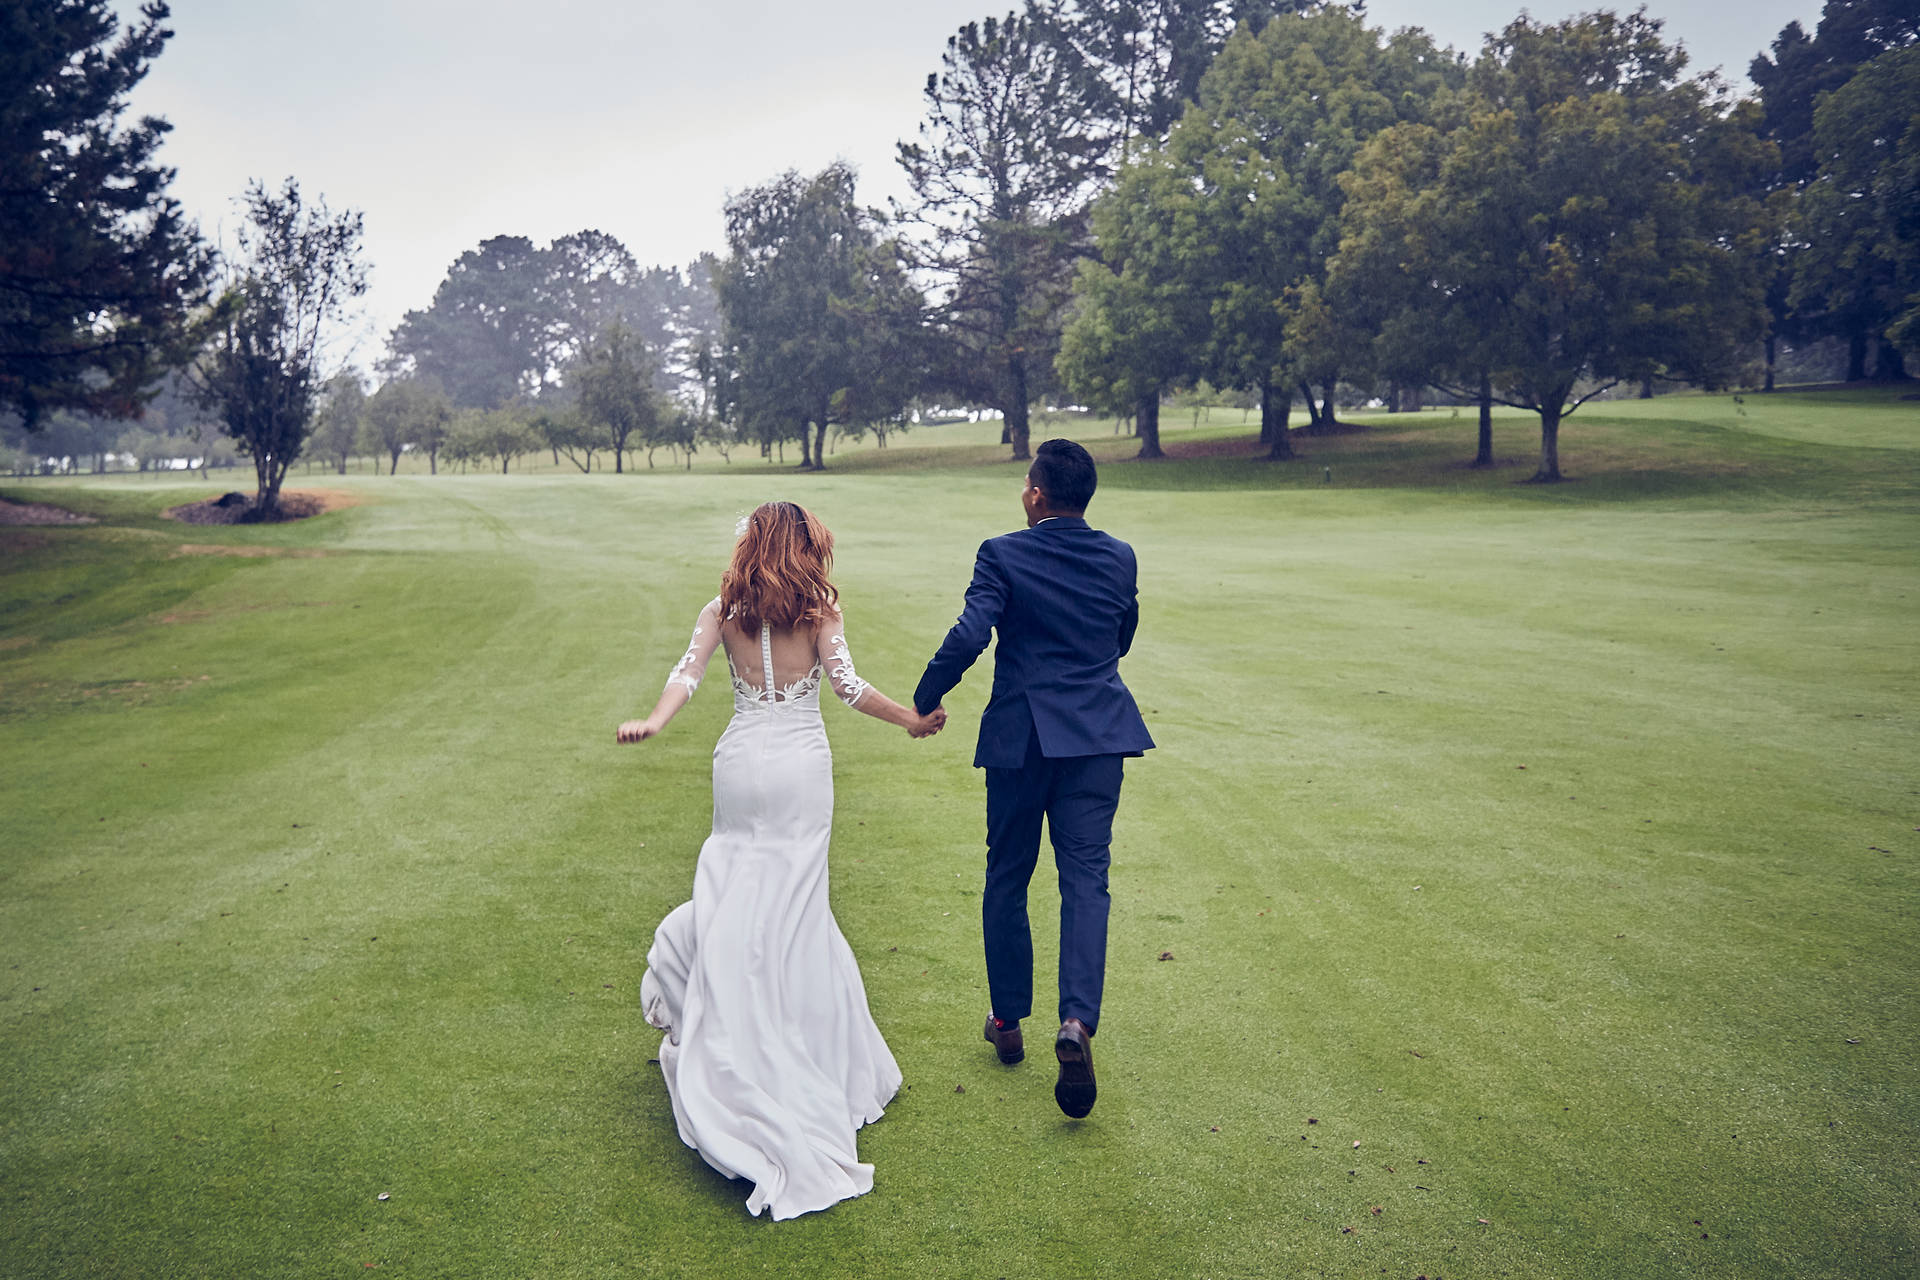 Groom And Bride Running On Golf Course